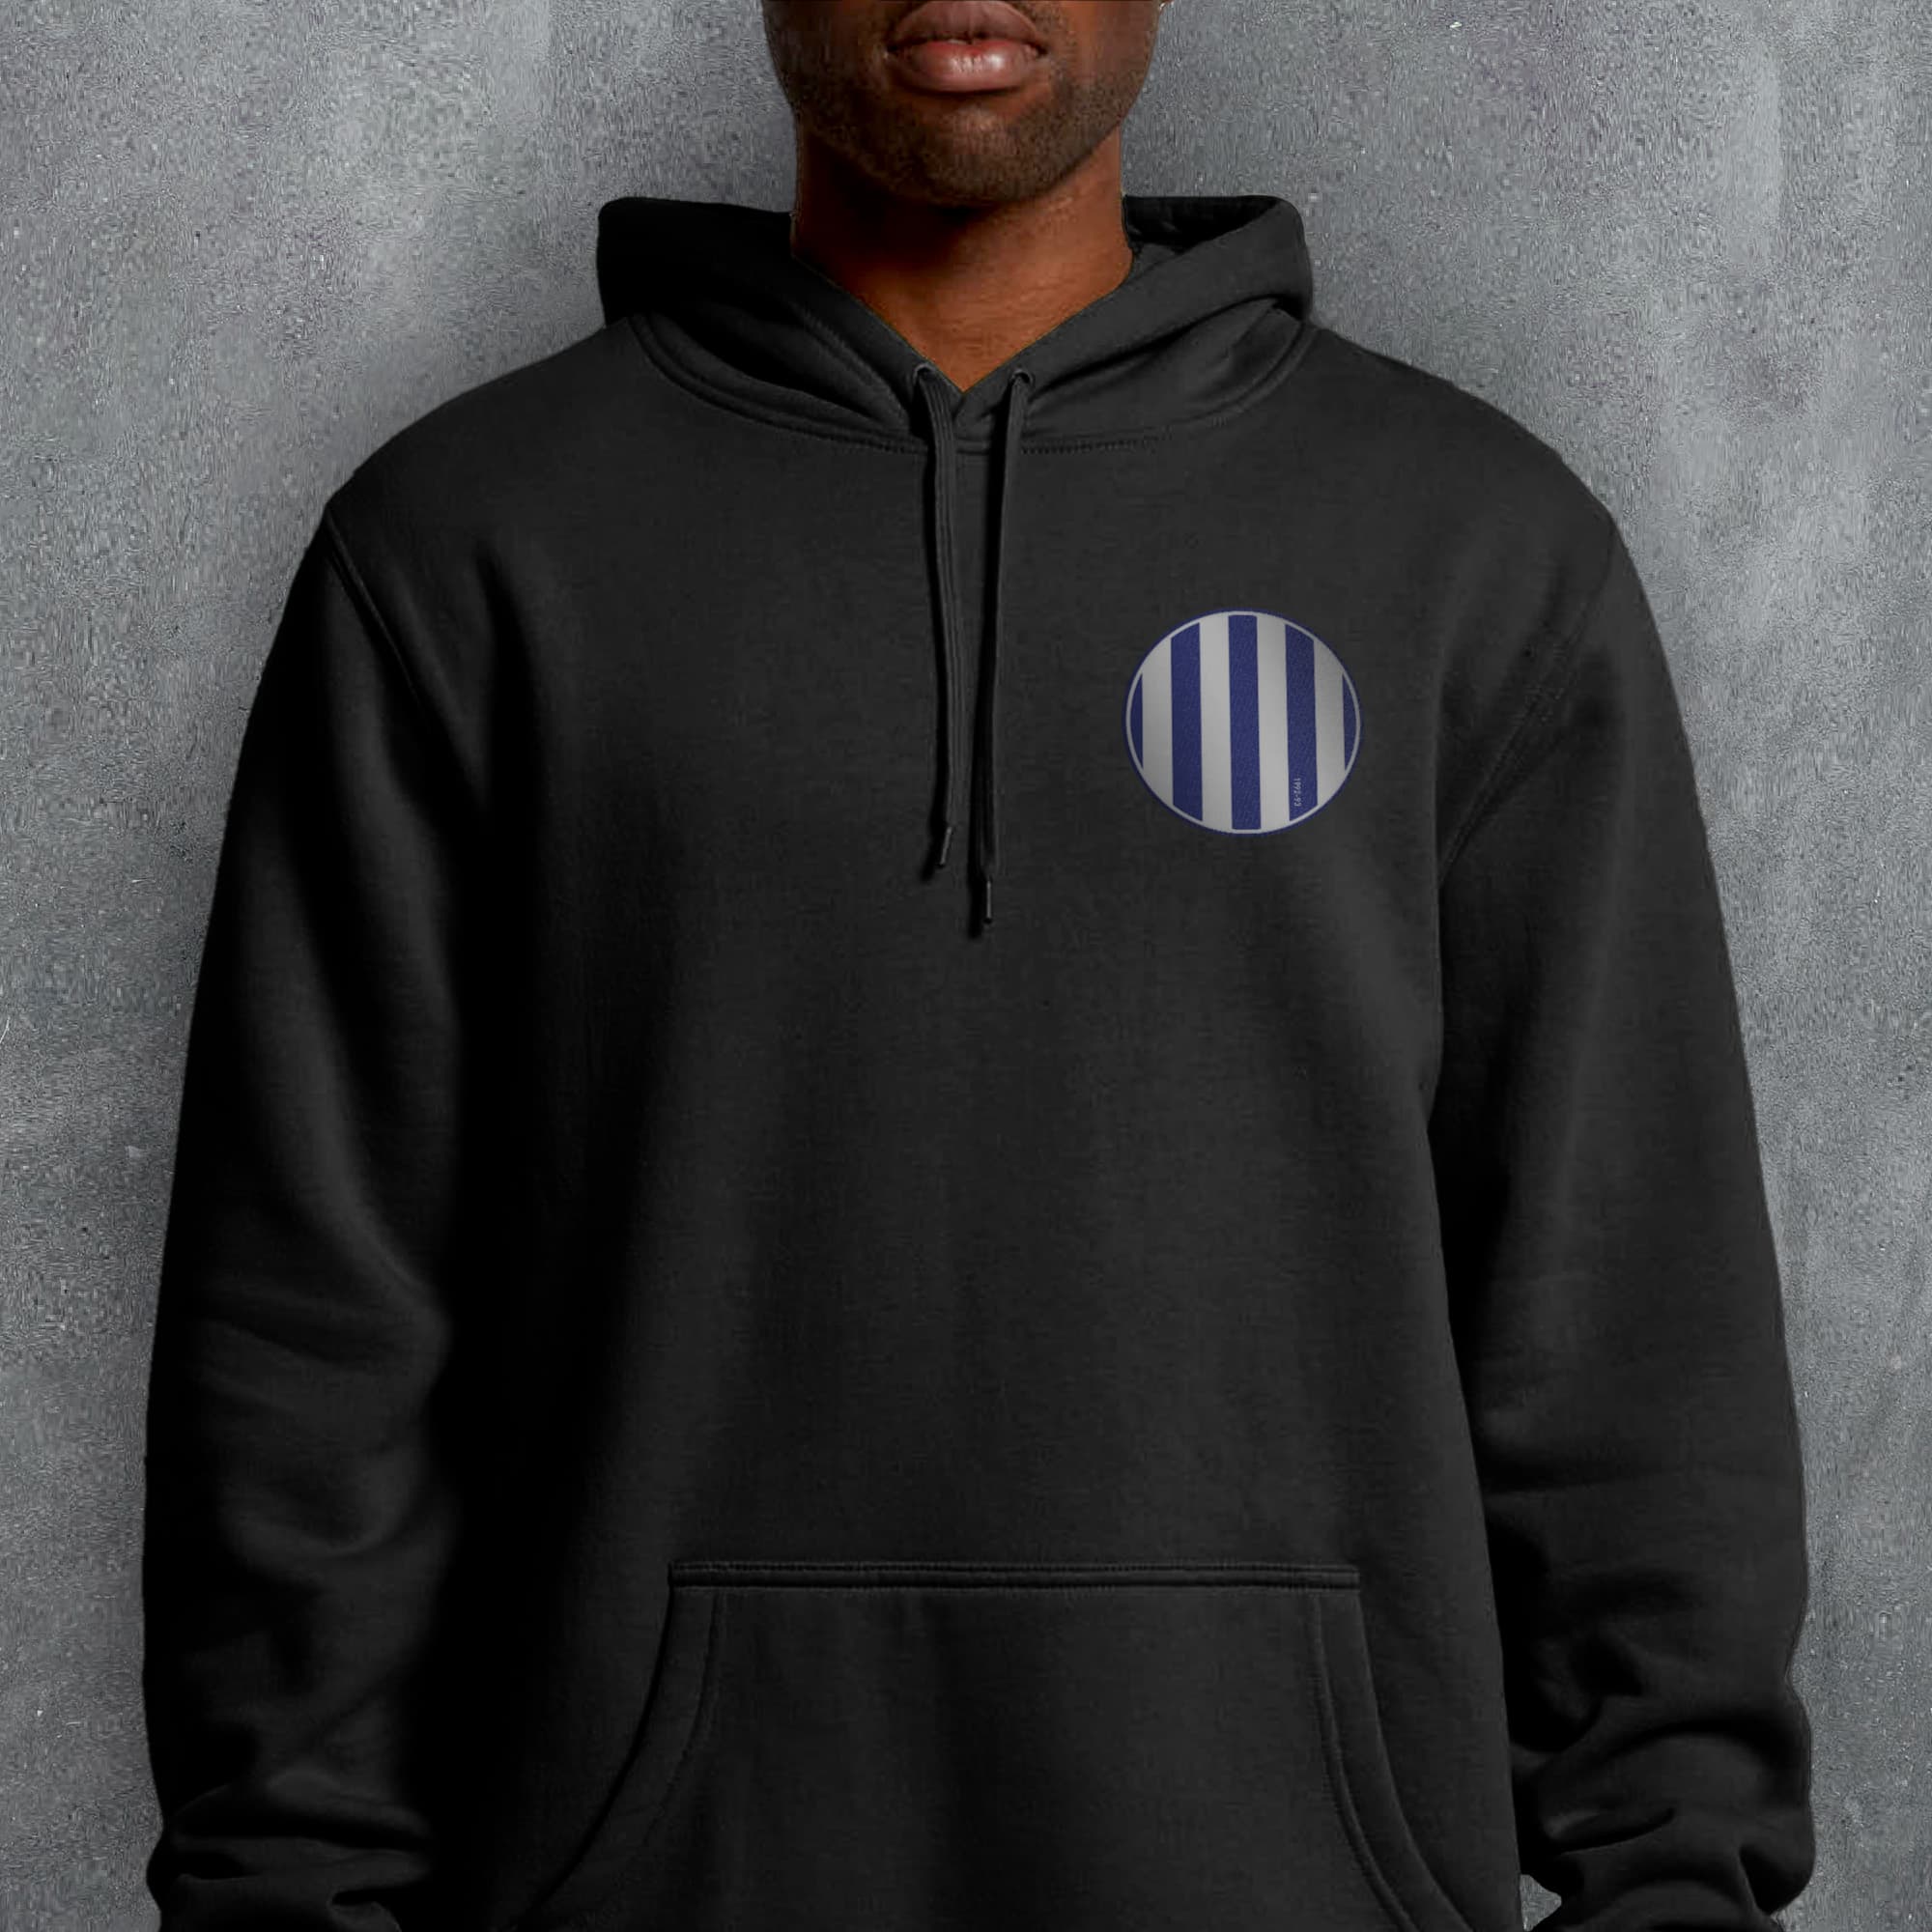 a man wearing a black hoodie with a blue and white stripe on it